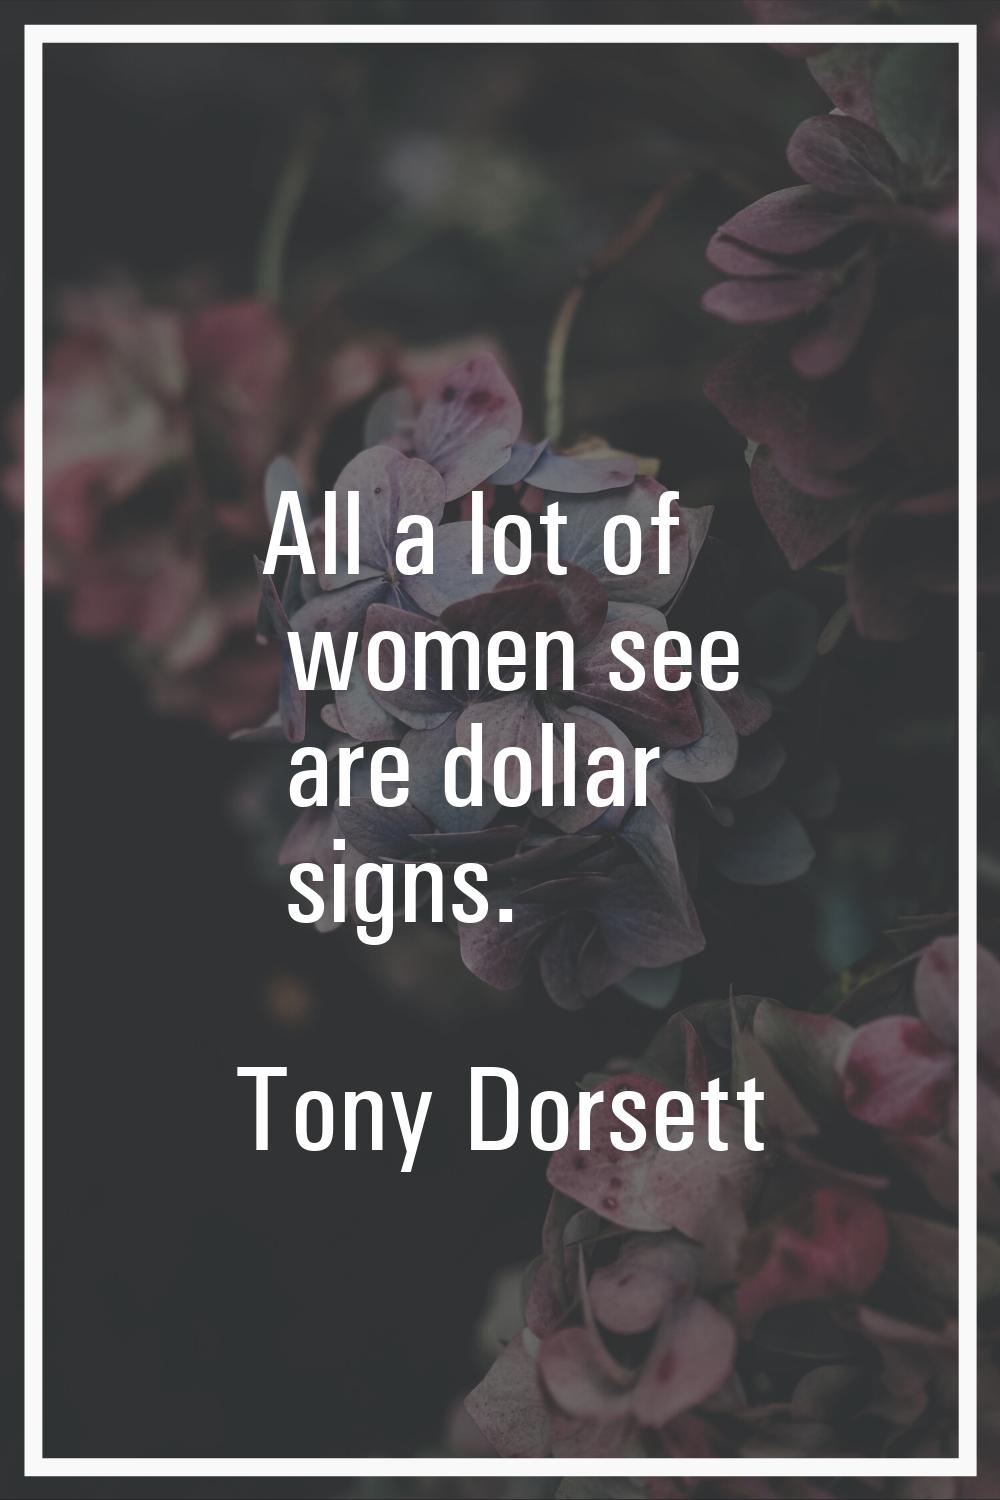 All a lot of women see are dollar signs.